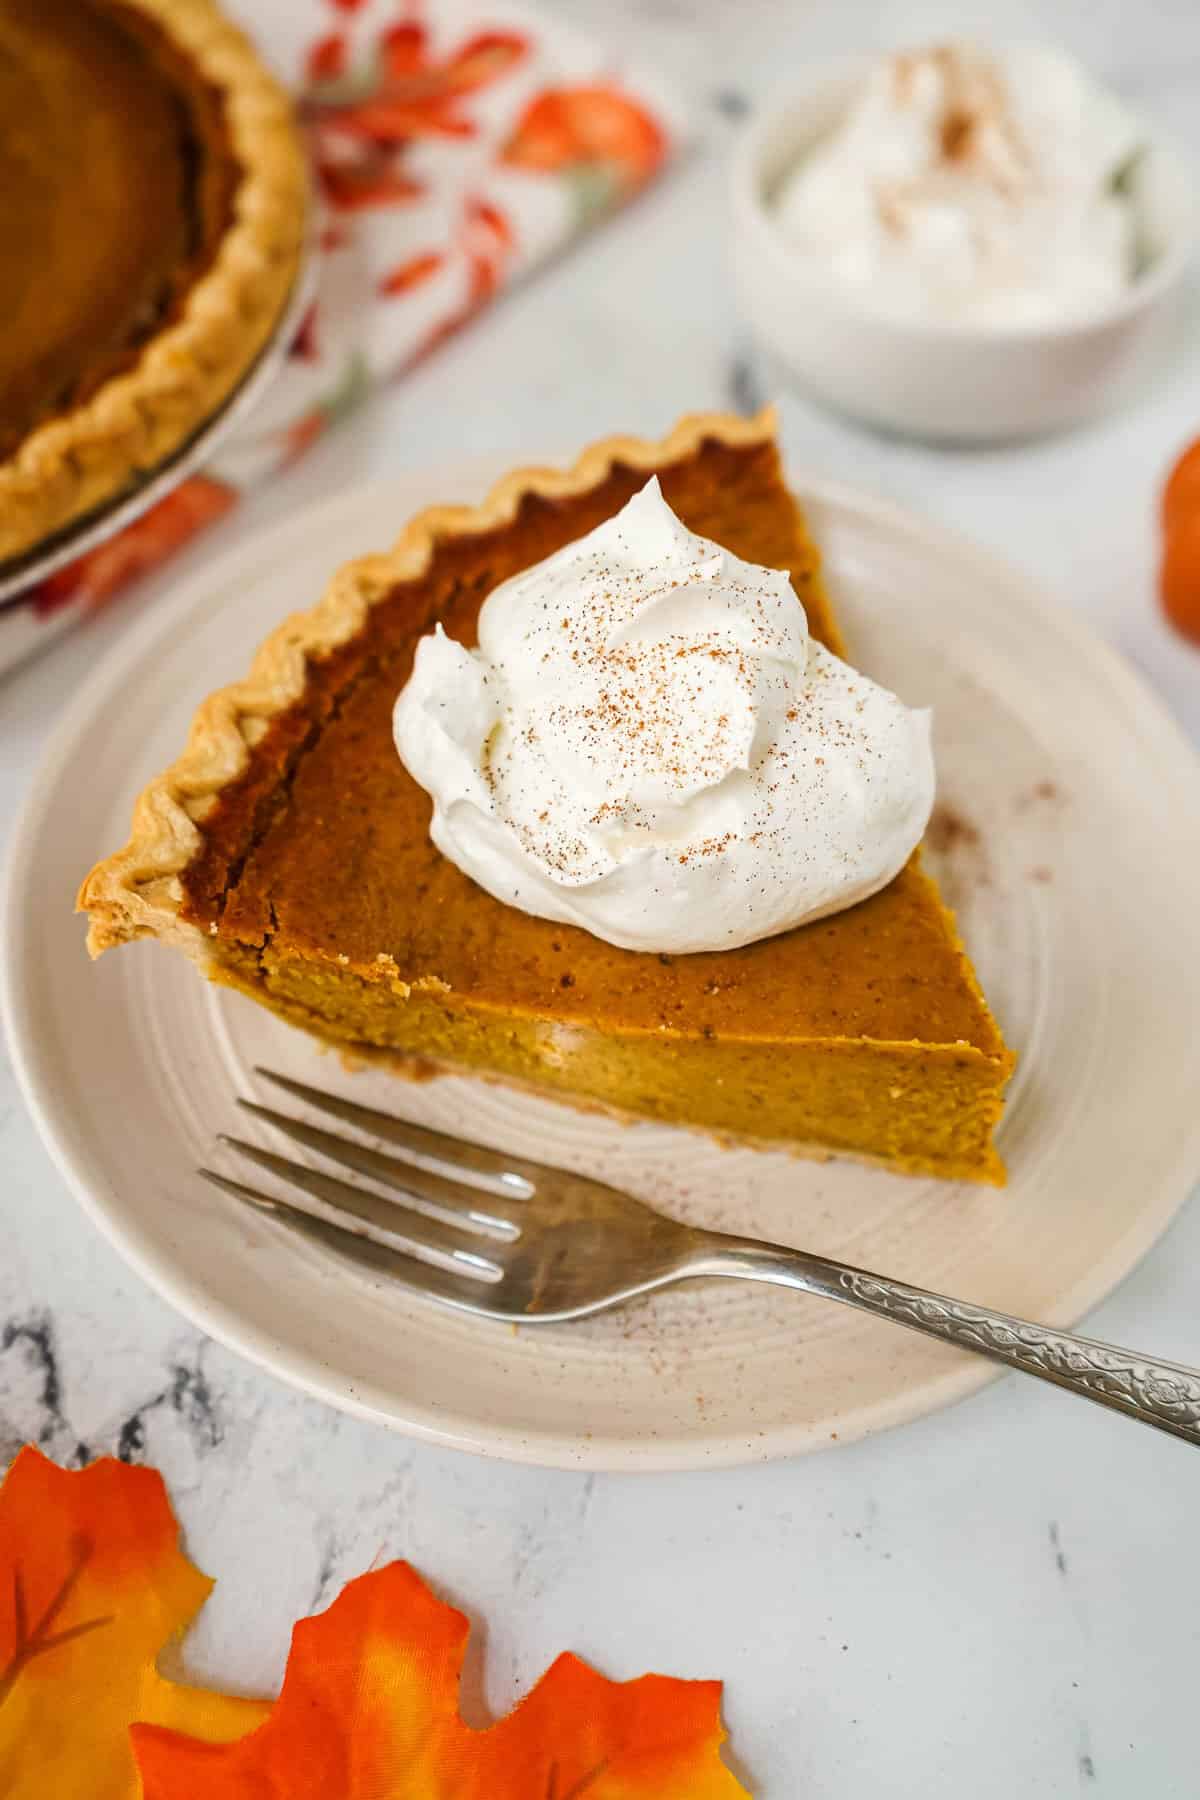 A slice of pumpkin pie with whipped cream on a plate with a fork.